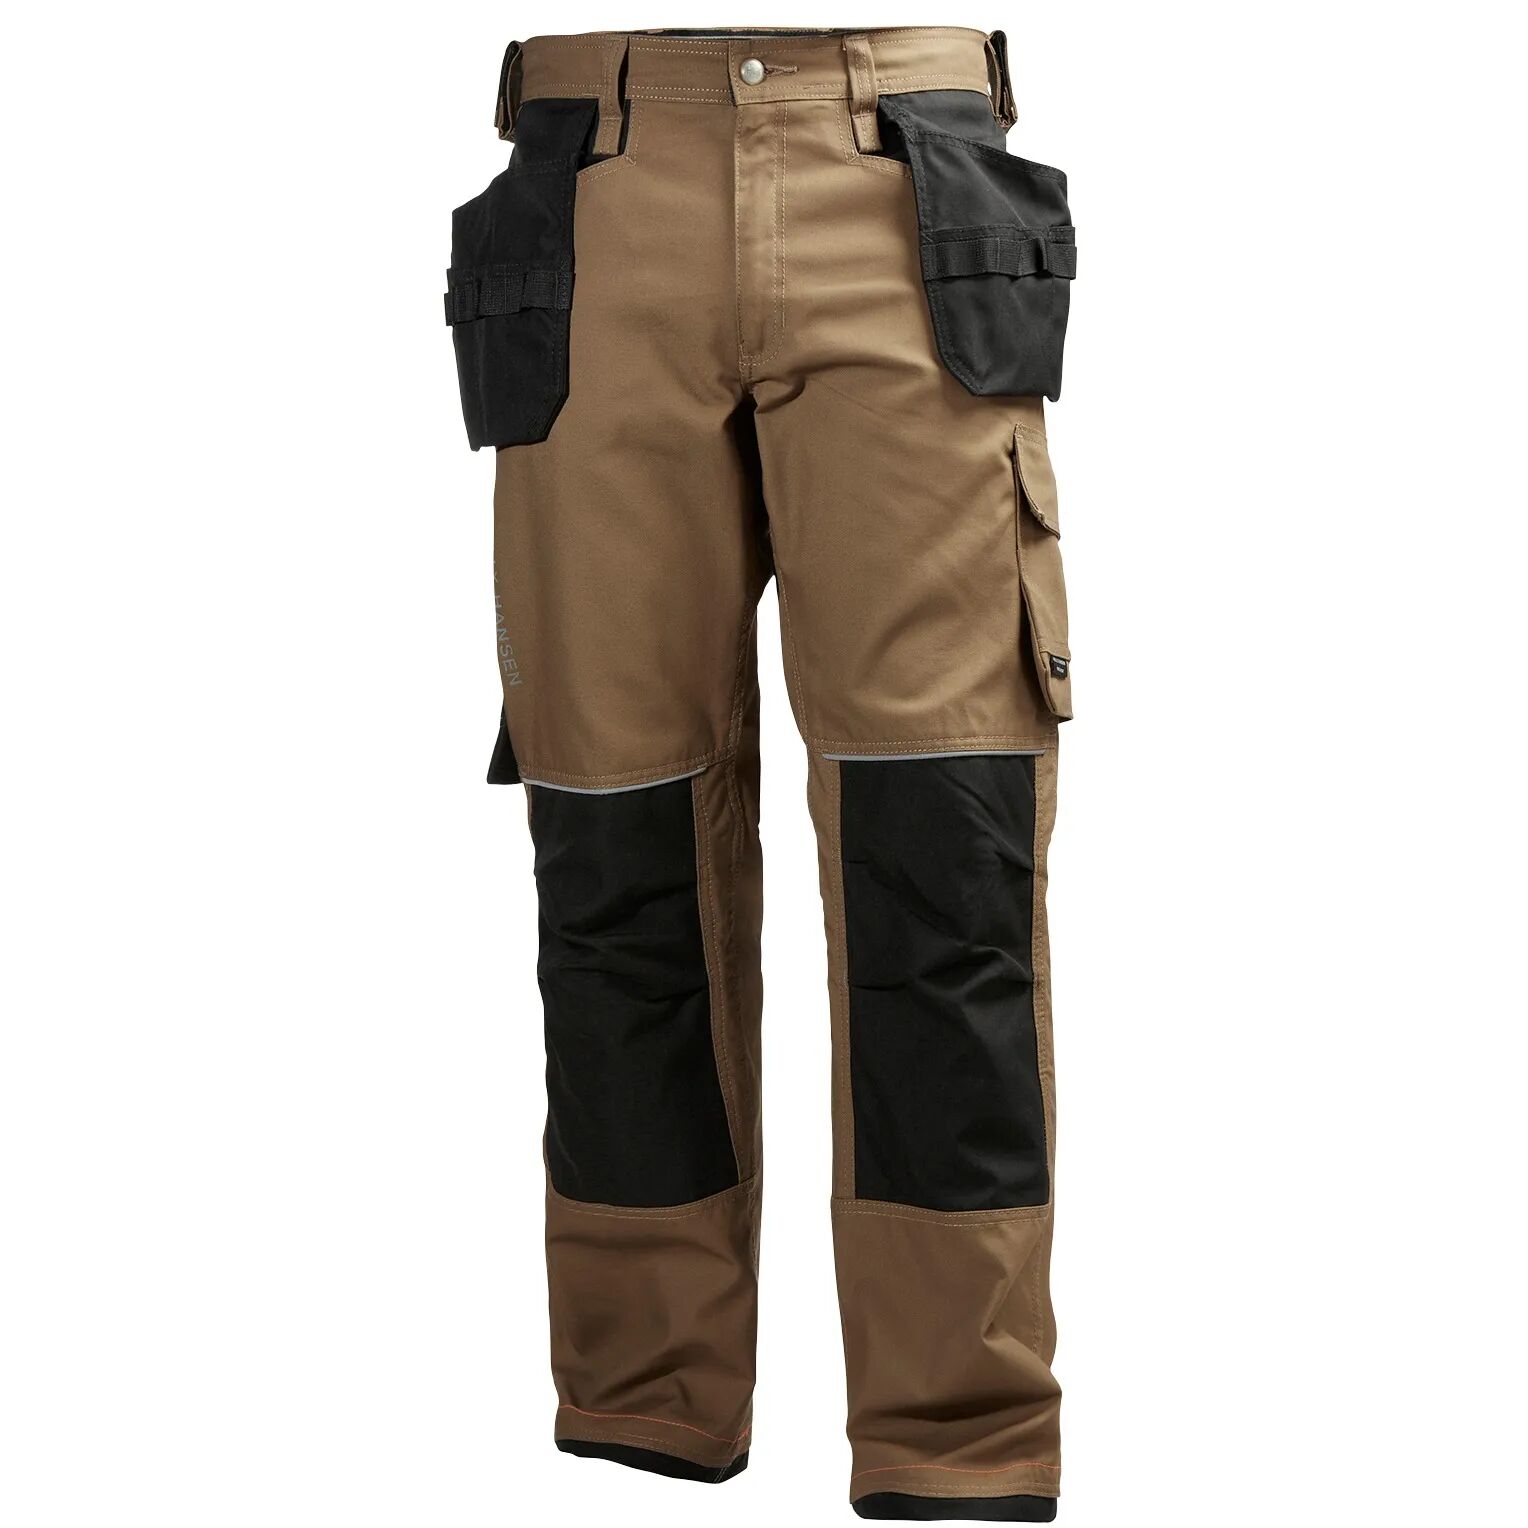 HH Workwear Helly Hansen WorkwearChelsea Durable Reflective Construction Pants Brown 42/32